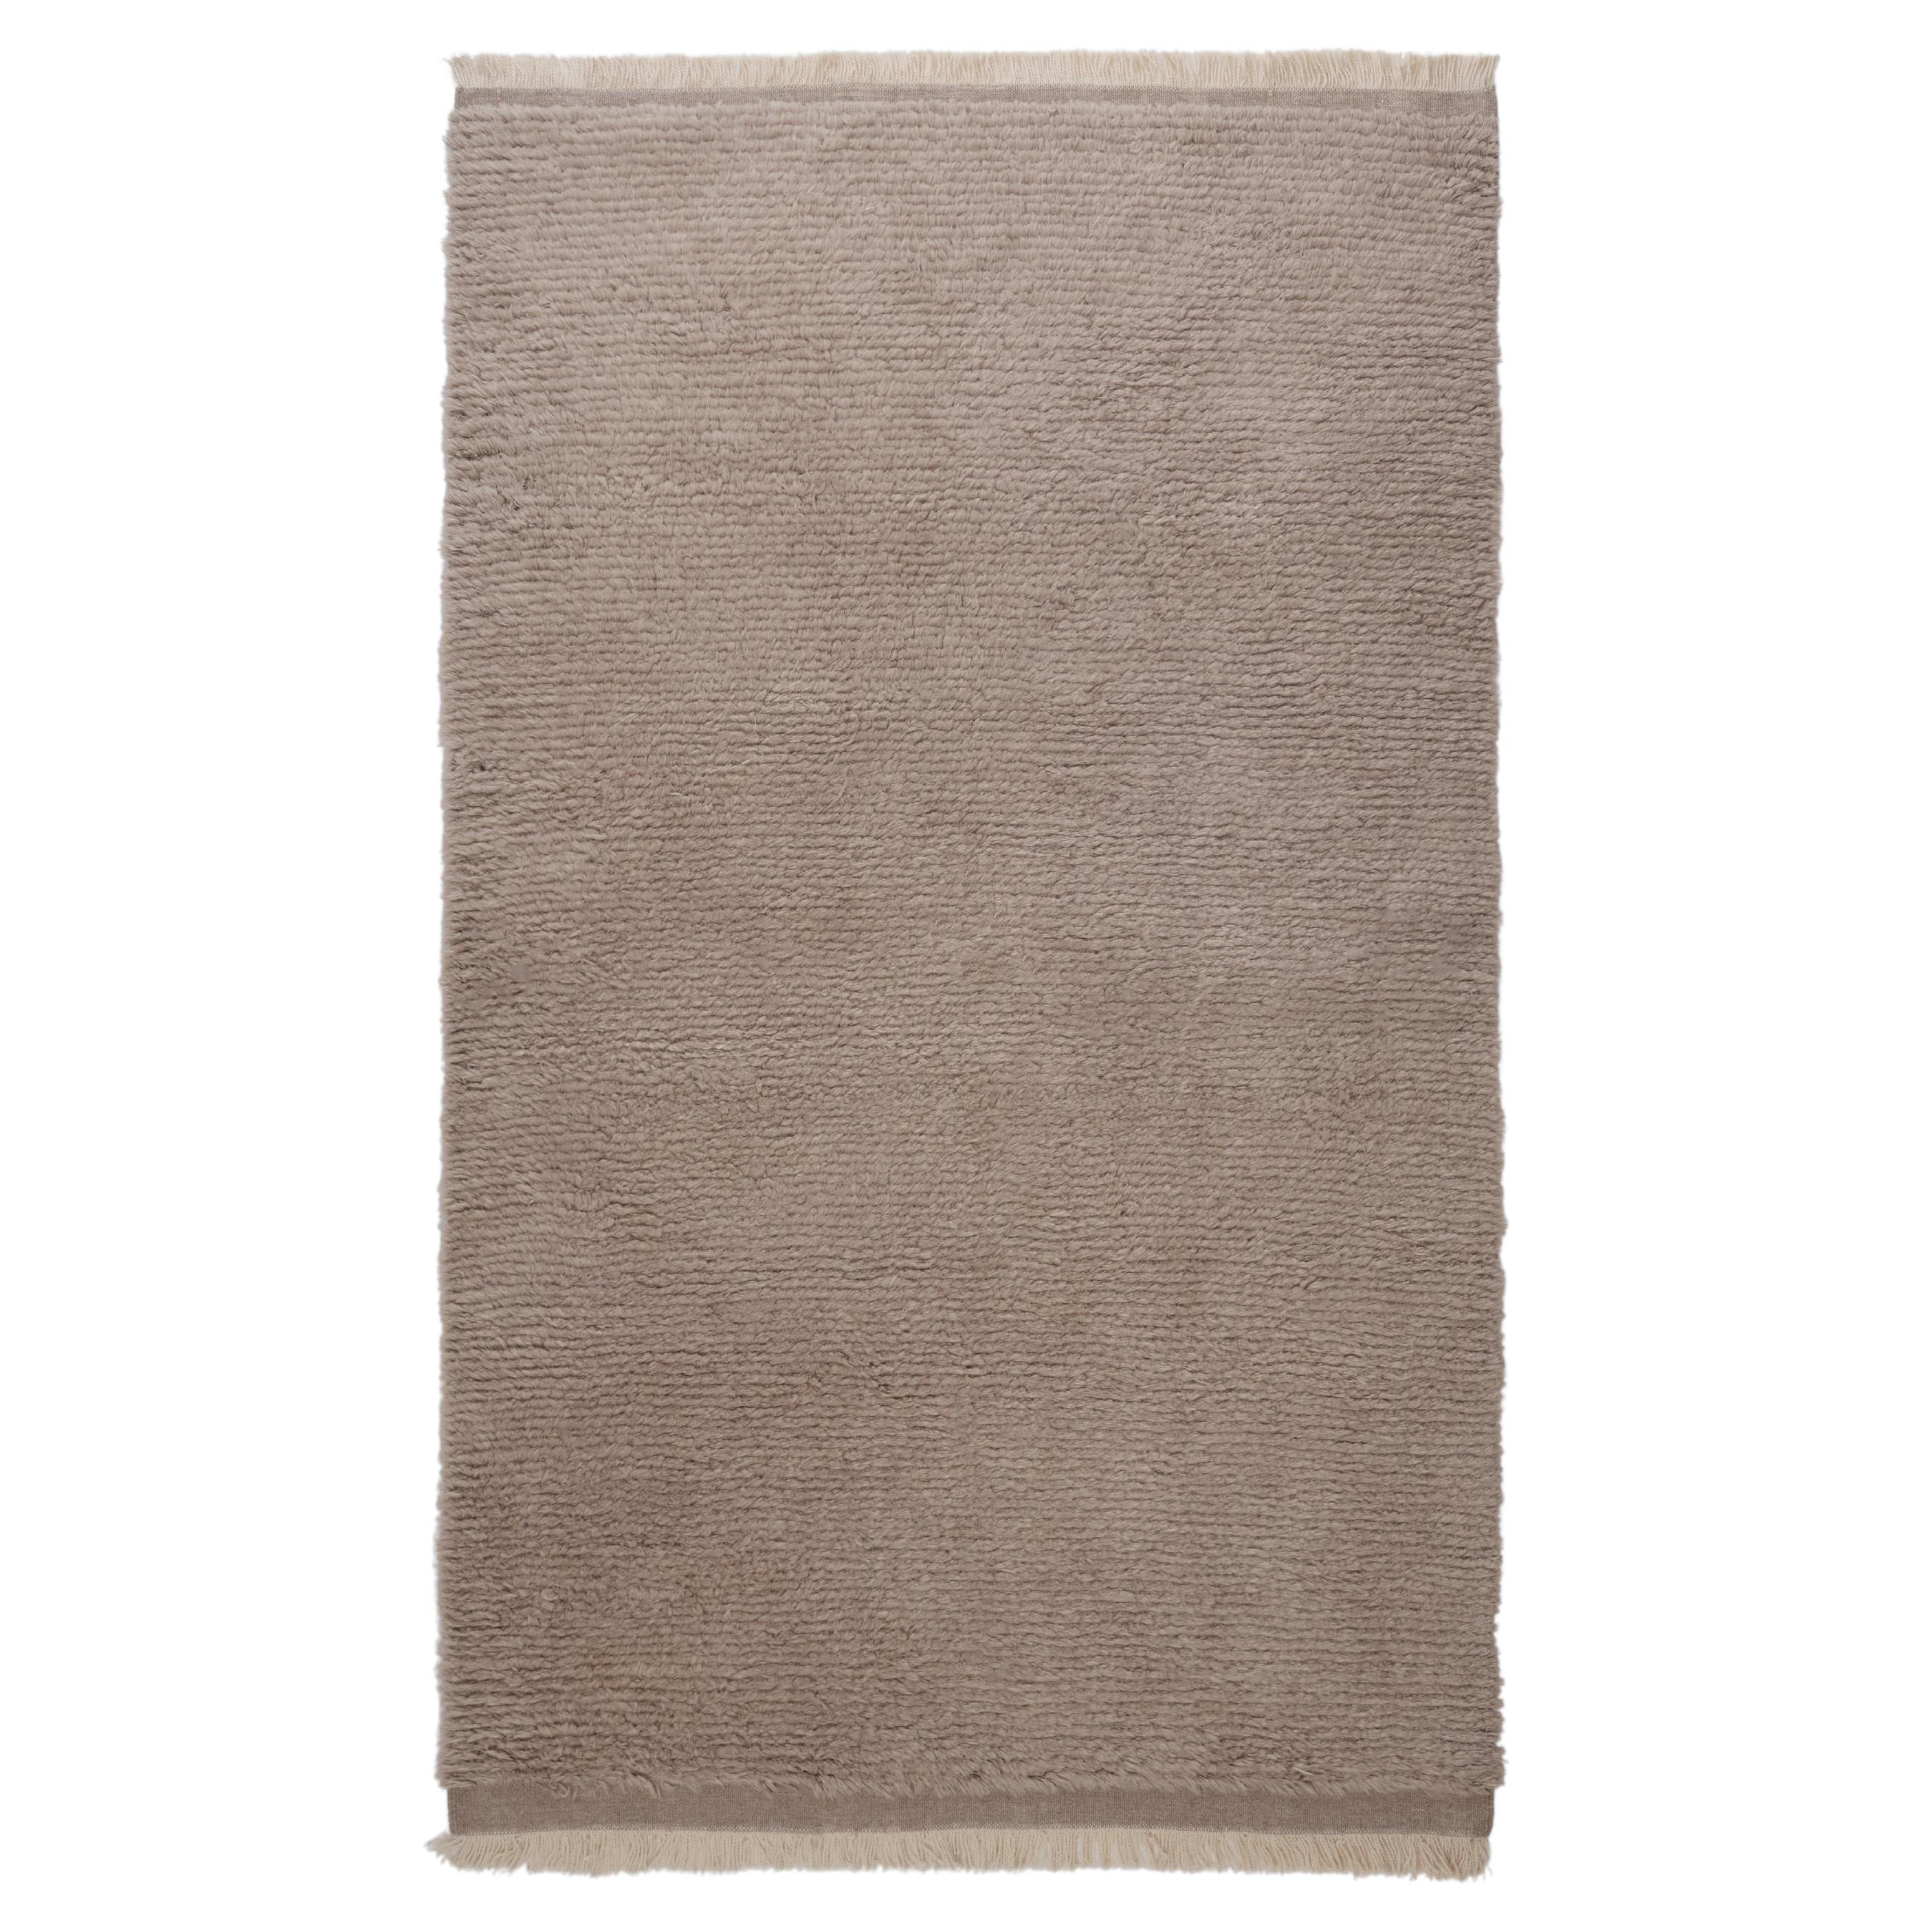 The Forsyth Woolly Shag Rug - Short Pile, Taupe, 9x12 For Sale